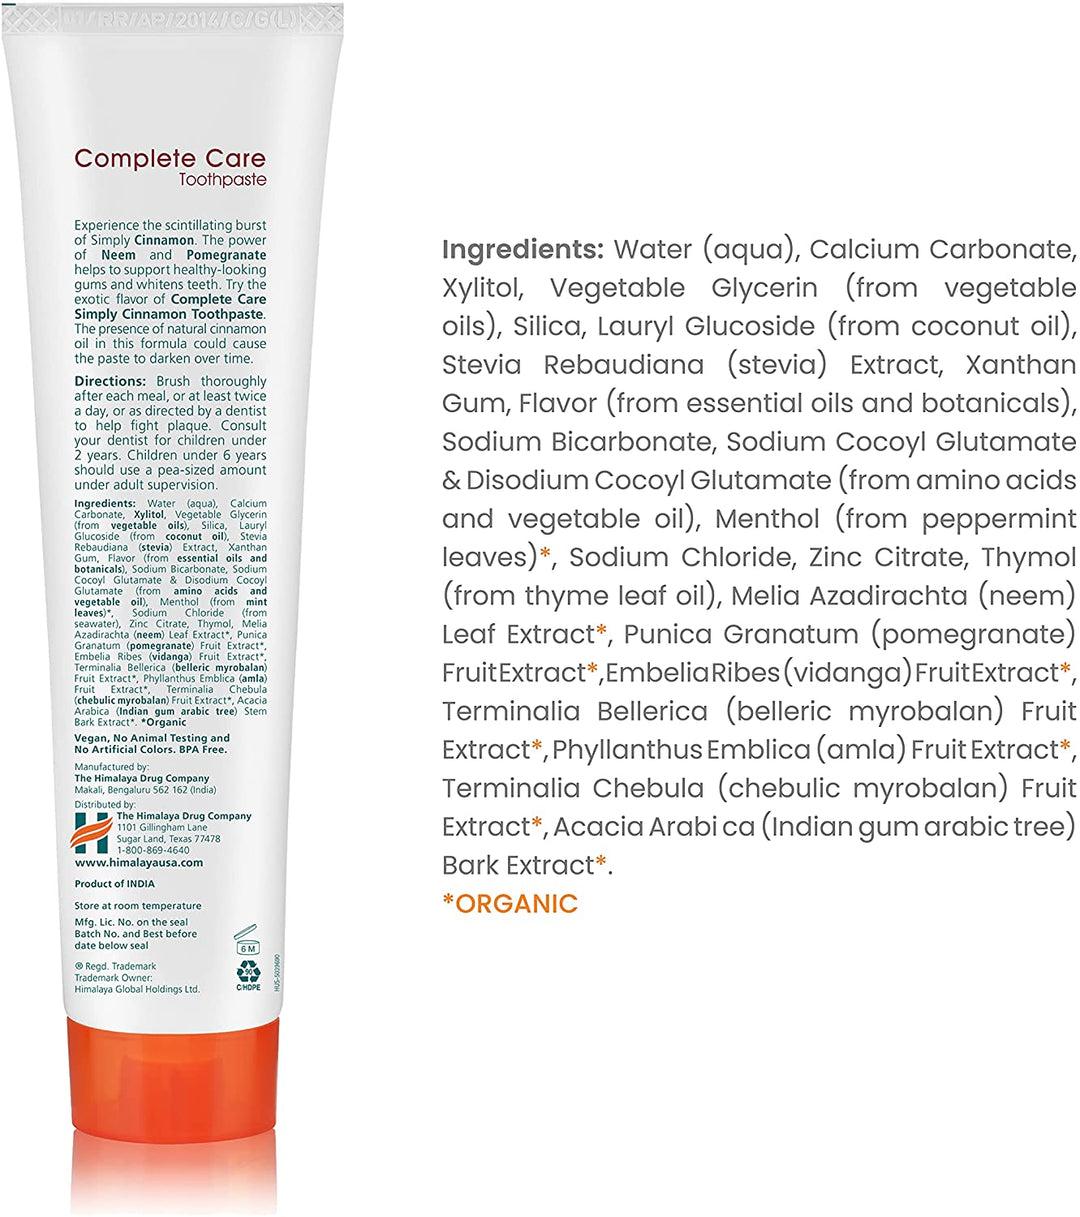 Himalaya BOTANIQUE Complete Care Toothpaste - Simply Cinnamon